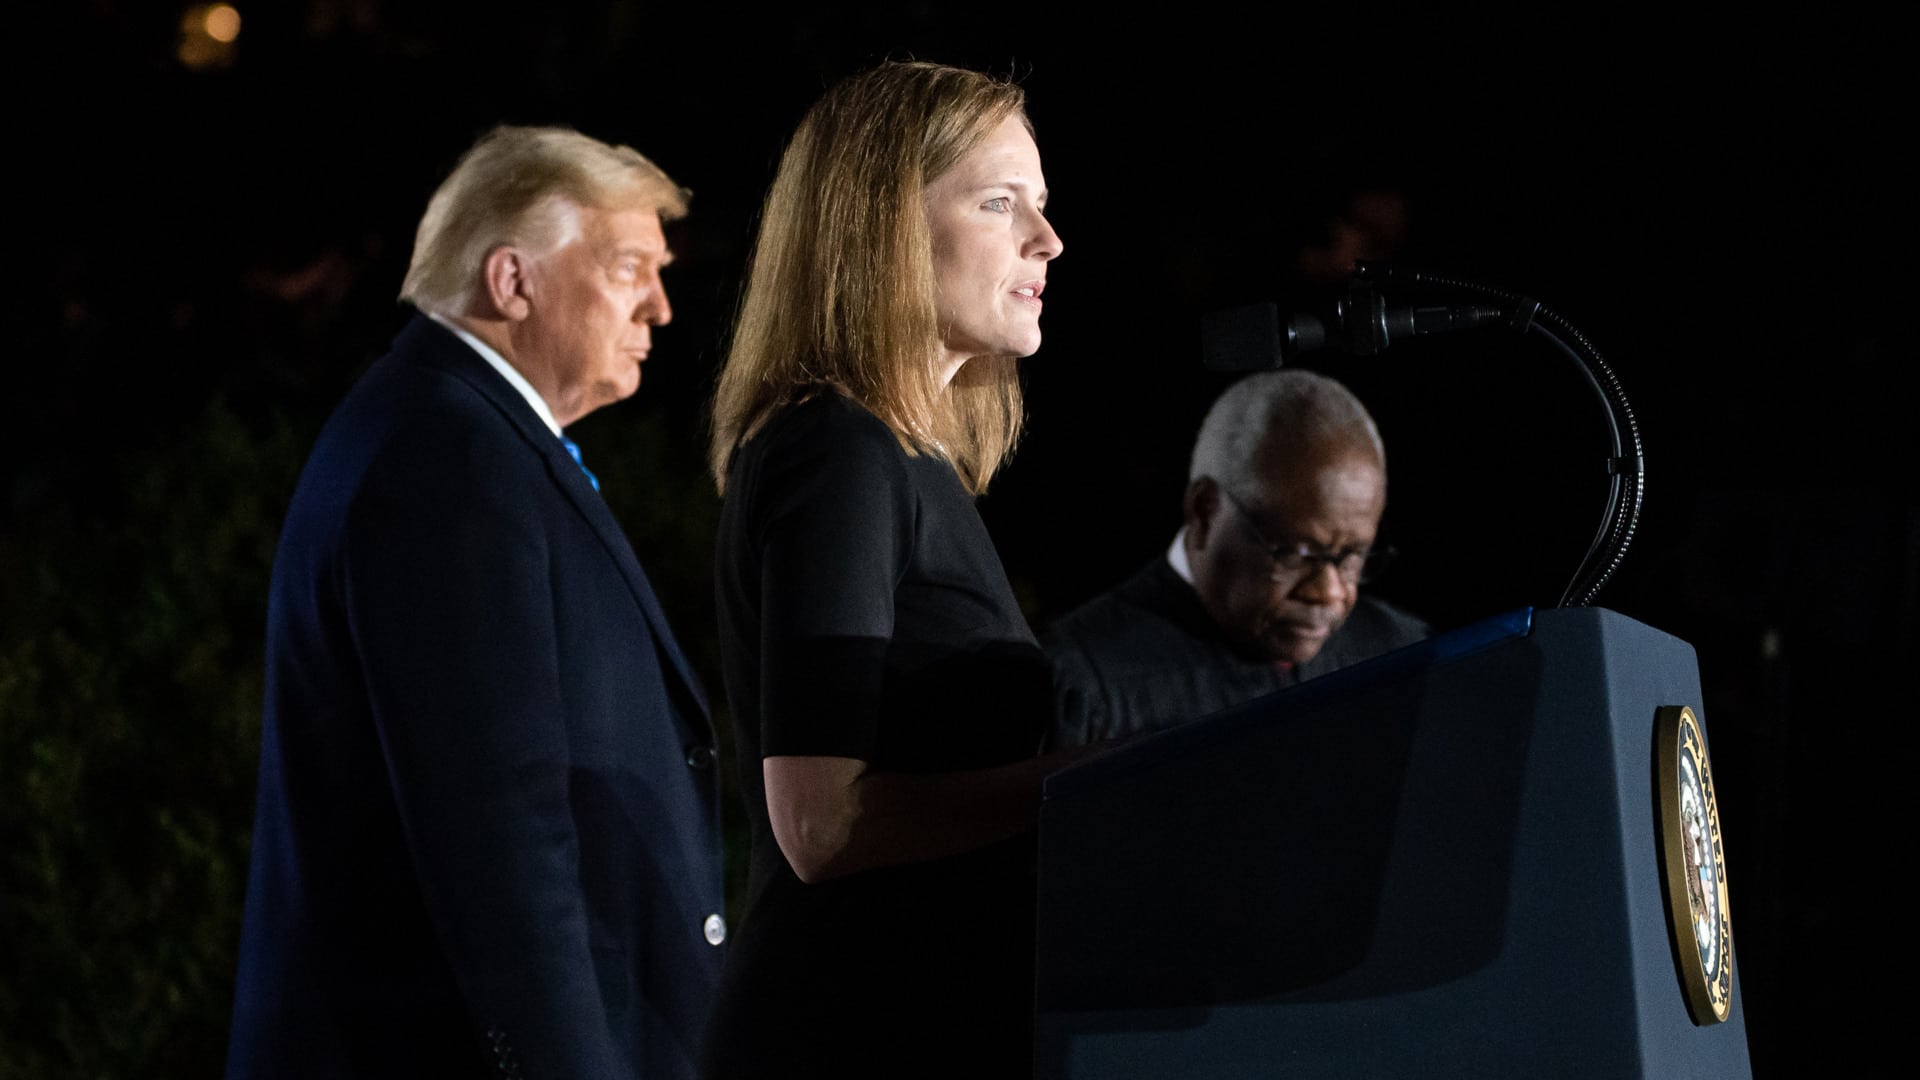 Justice Amy Coney Barrett delivers remarks during her swearing-in ceremony on October 26, 2020.